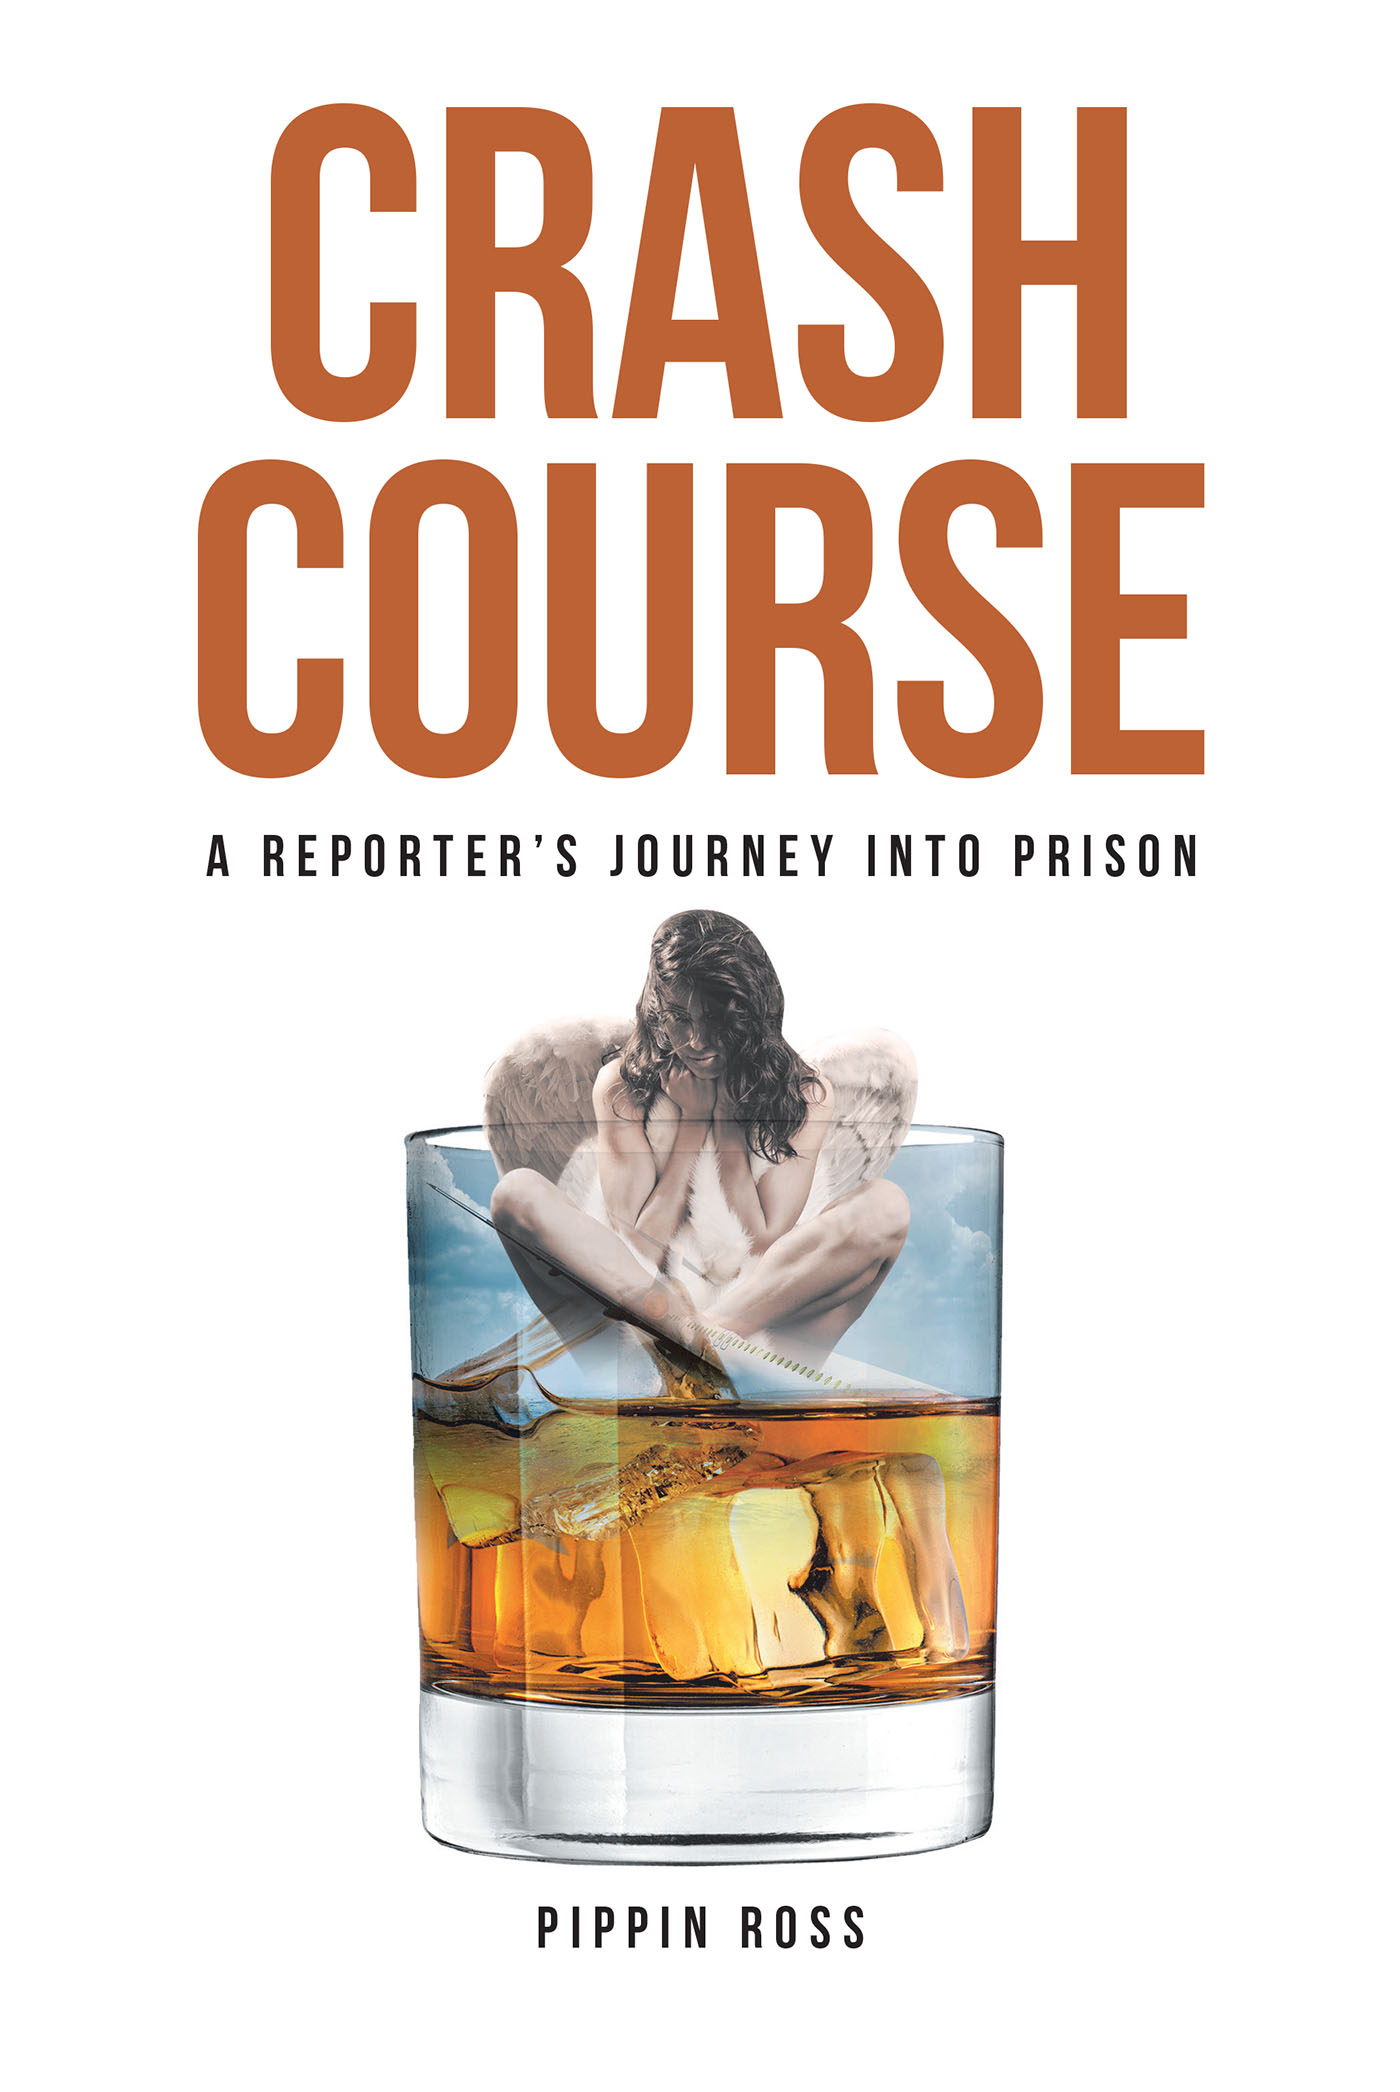 Pippin Ross’s New Book, “Crash Course: A Reporter's Journey into Prison," is a Frontline Expose Which Documents Hard-Core Events That Forced the Author’s Time in Prison